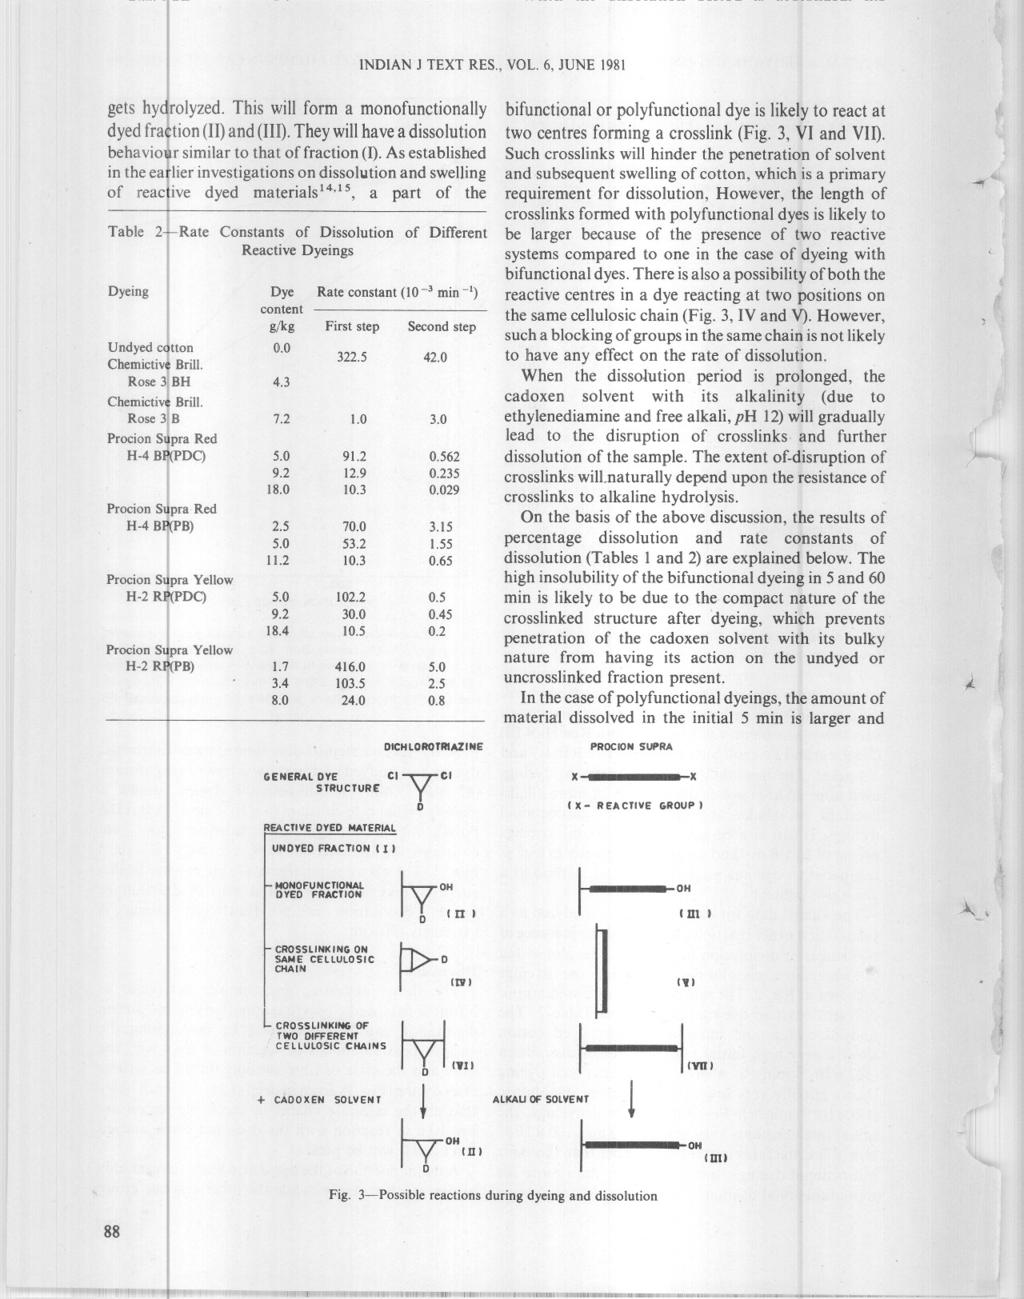 INDIAN J TEXT RES., VOL. 6, JUNE 1981 gets hydrolyzed. This will form a monofunctionally dyed fraction (II) and (In). They will have a dissolution behaviour similar to that offraction (I).